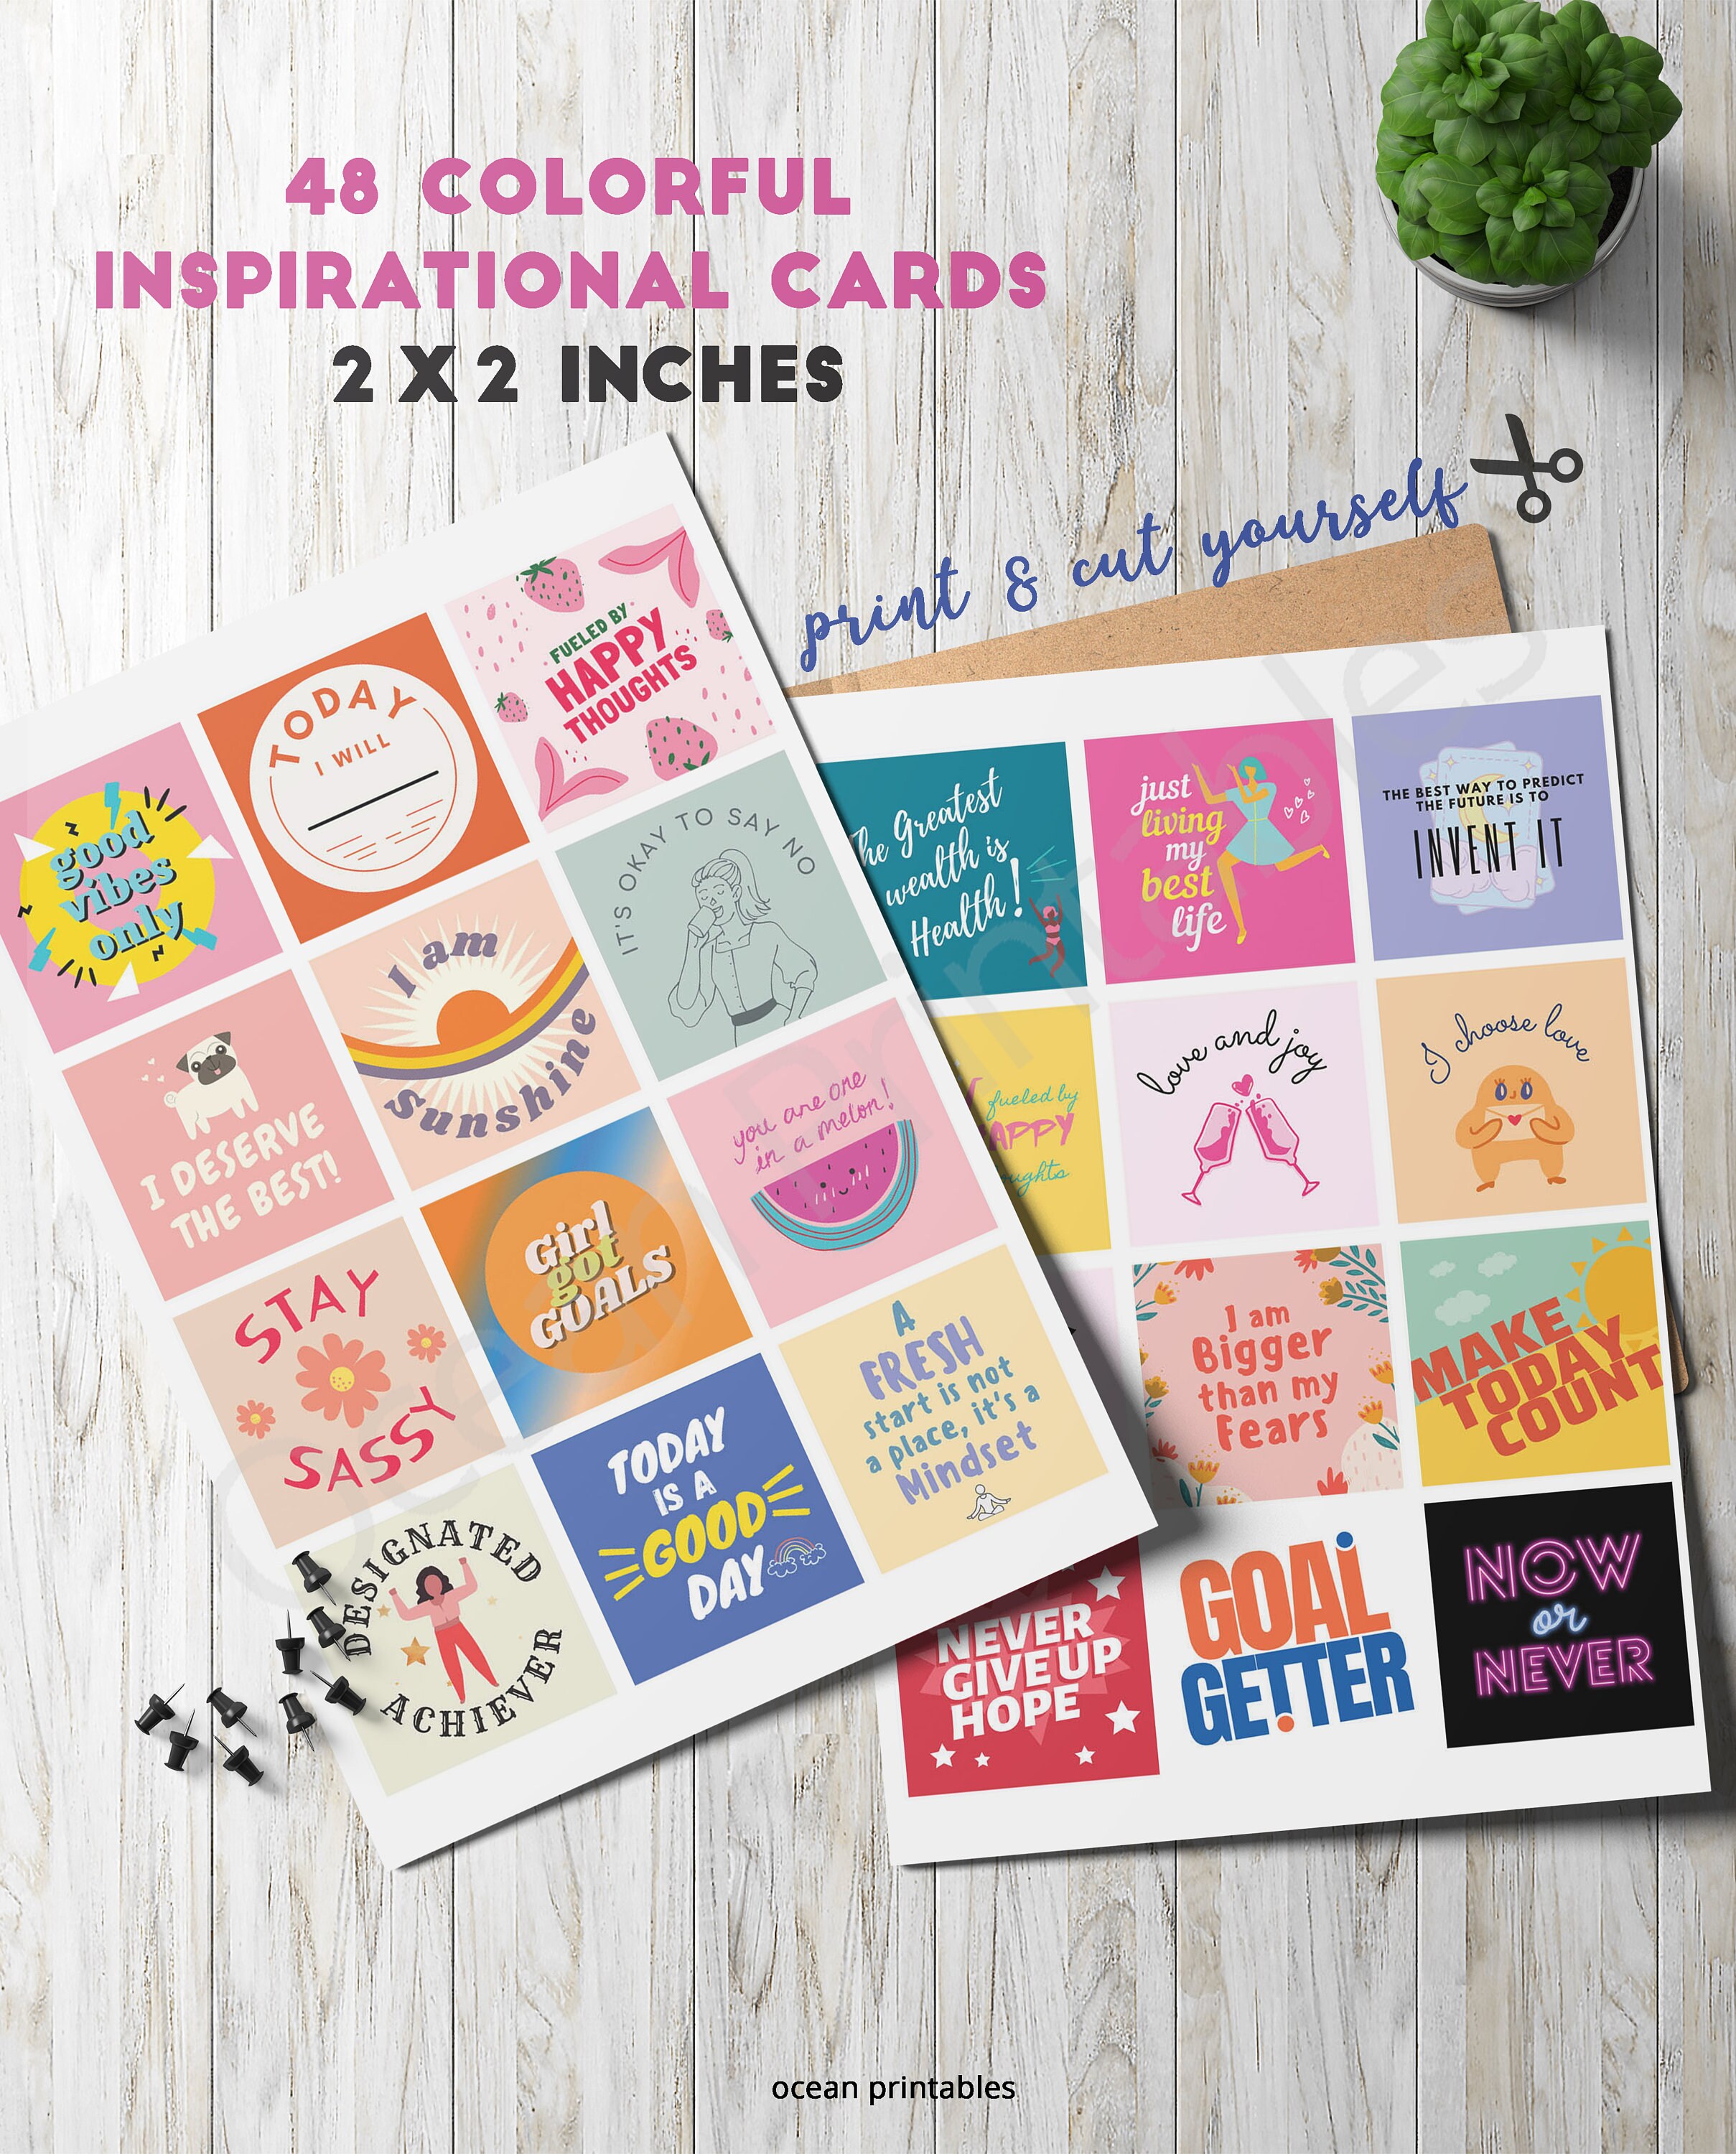  Vision Board Kit for Ambitious People- Foldable Mood & Dream  Board for Manifestation, Visualization & Goal Setting, 125 Aesthetic Photo &  25 Empowering Quote Cards